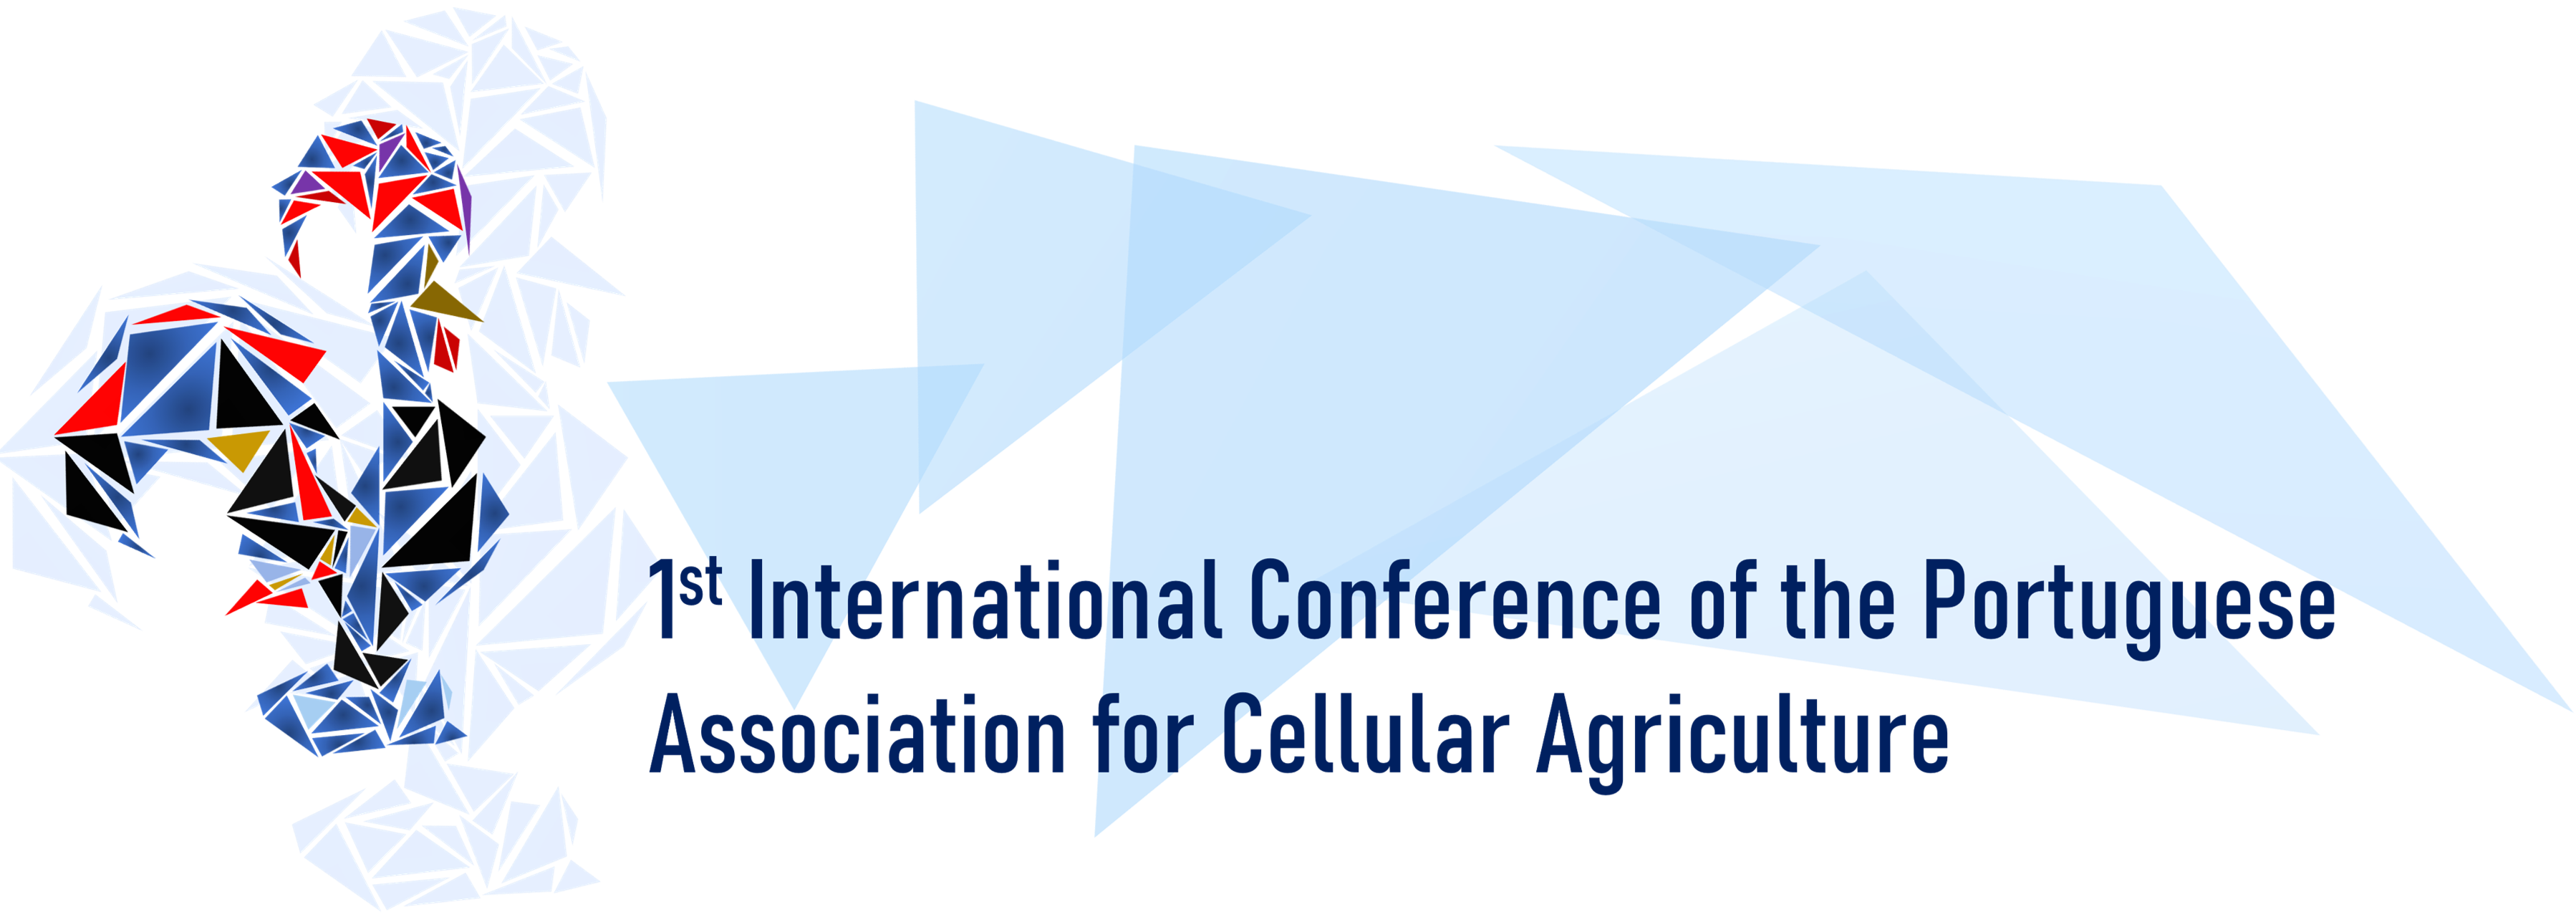 1st International Conference of the Portuguese
                  Association for Cellular Agriculture banner